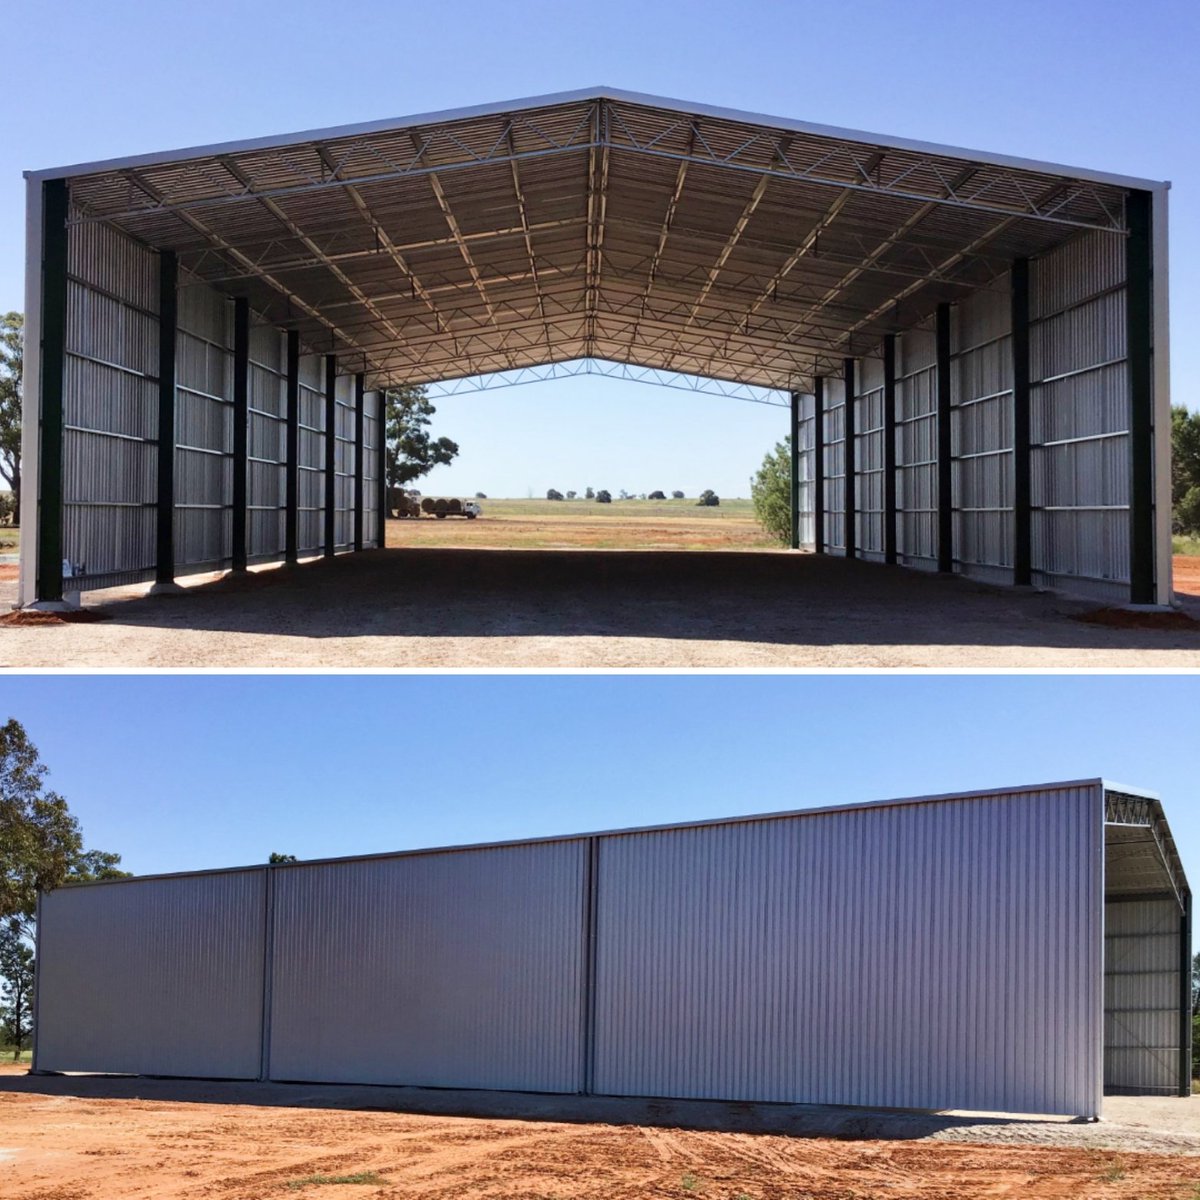 A 36m x 18.3m x 6.75m open ended farm shed completed last week in Boree Creek NSW. 👍
#simplybettersheds #farmsheds #farmbuildings #haysheds #machinarysheds #grainsheds #steel #steelfabrication #wallawalla #boreecreek #riverina #thisistheborder #buylocal #familyownedandoperated